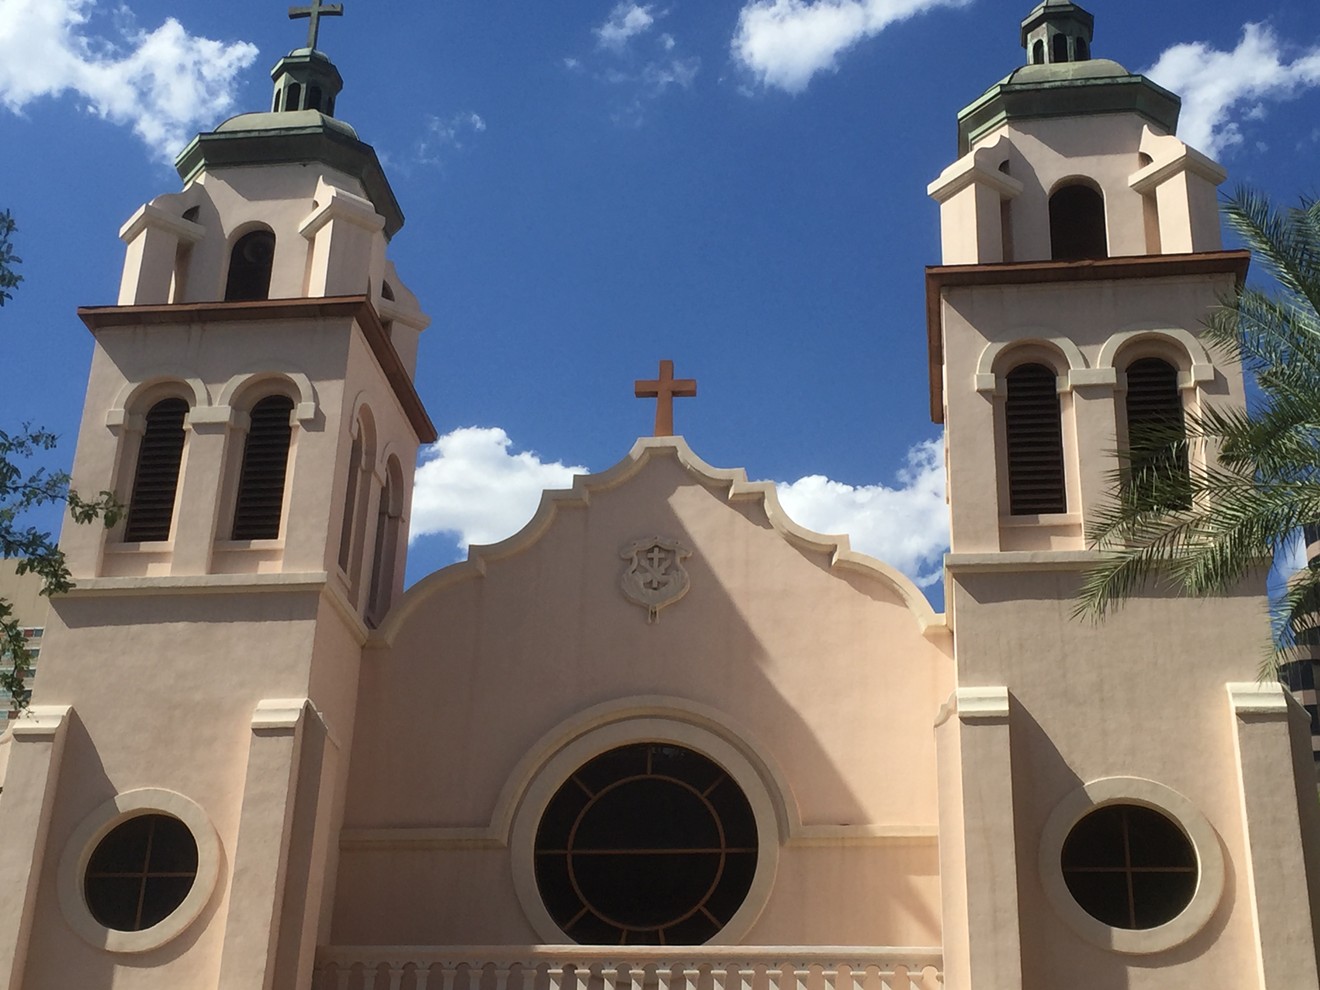 Saint Mary's Basilica sits next to the Diocese of Phoenix.